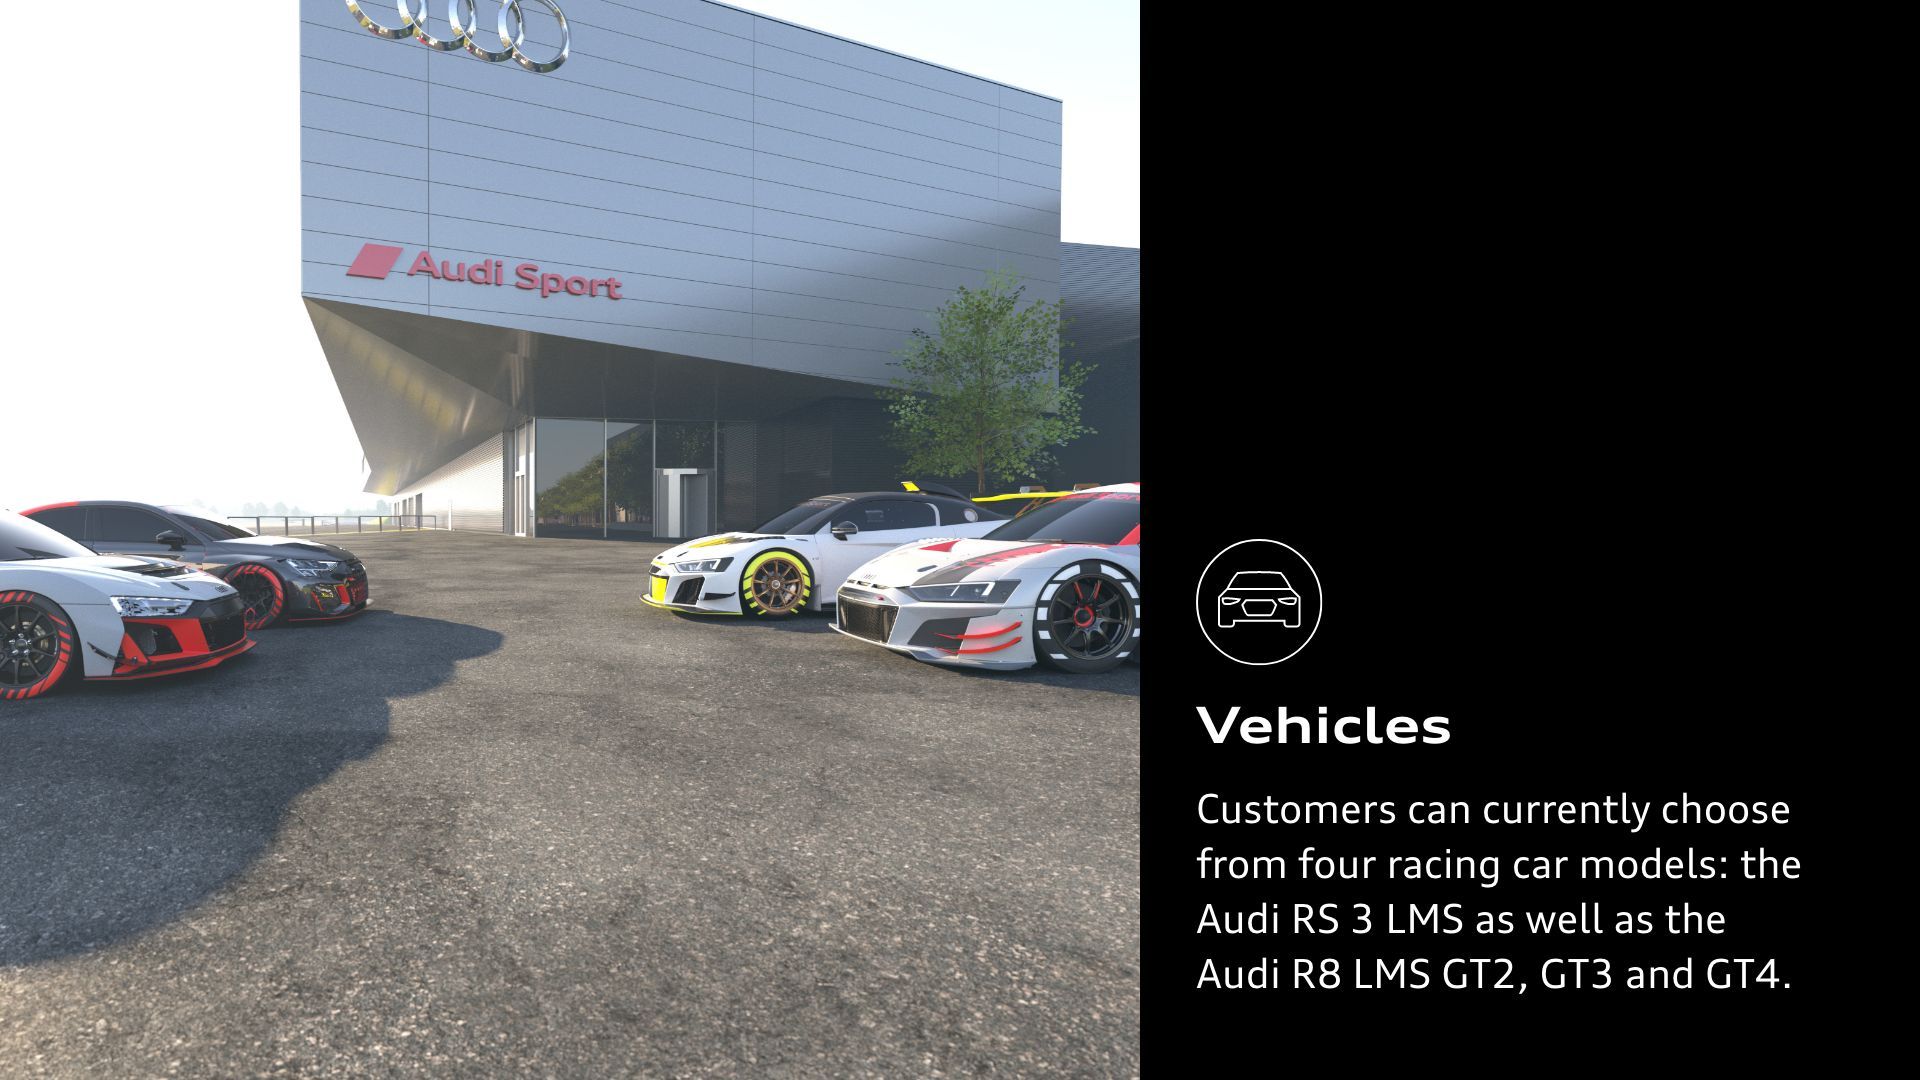 Vehicles: Customers can currently choose from four racing car models: the Audi RS 3 LMS as well as the Audi R8 LMS GT2, GT3 and GT4. 